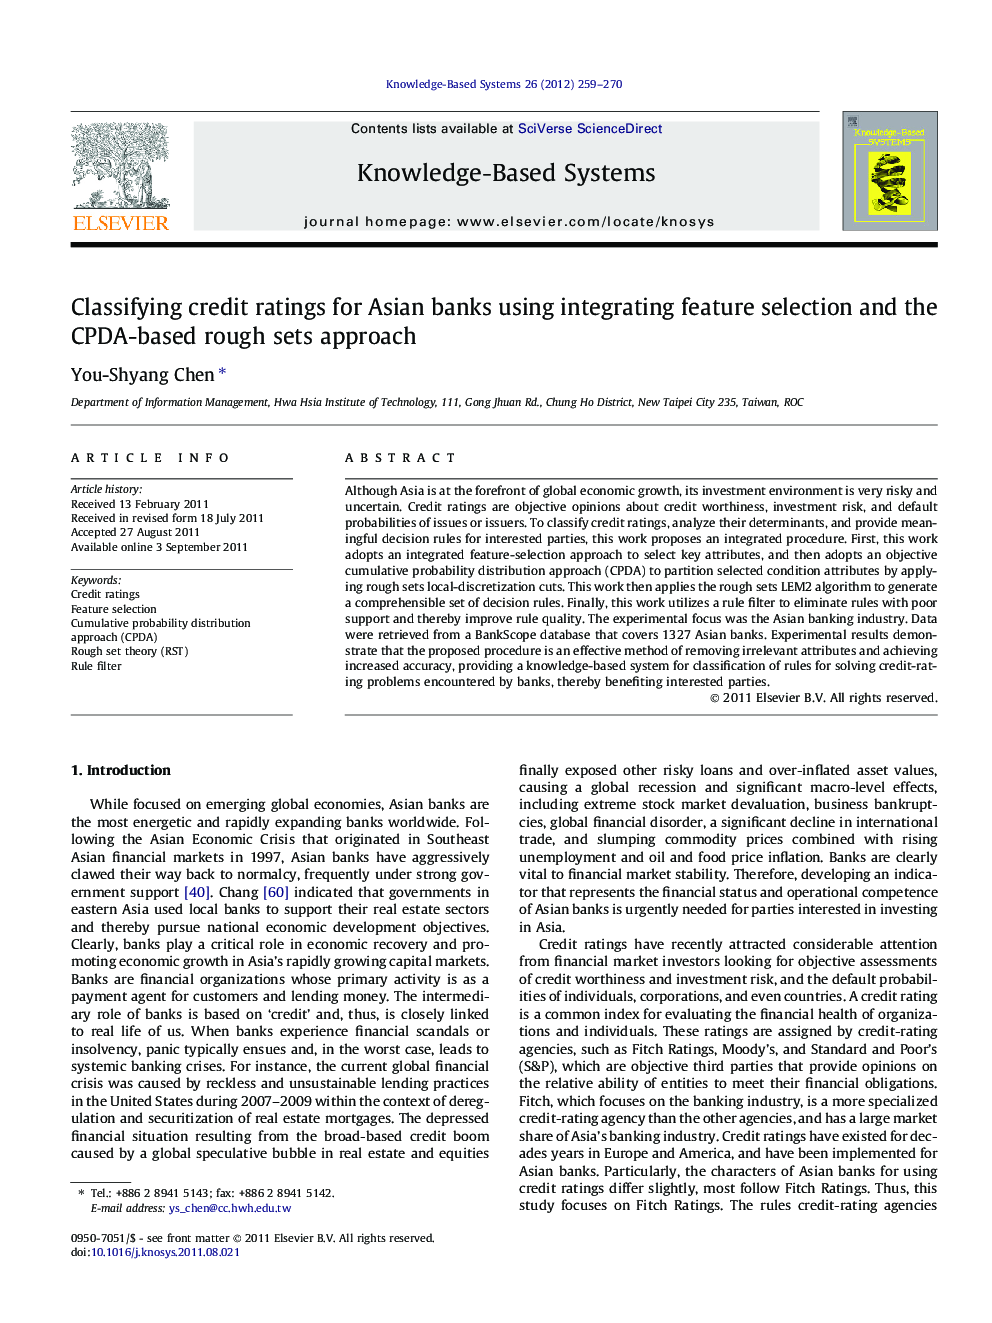 Classifying credit ratings for Asian banks using integrating feature selection and the CPDA-based rough sets approach